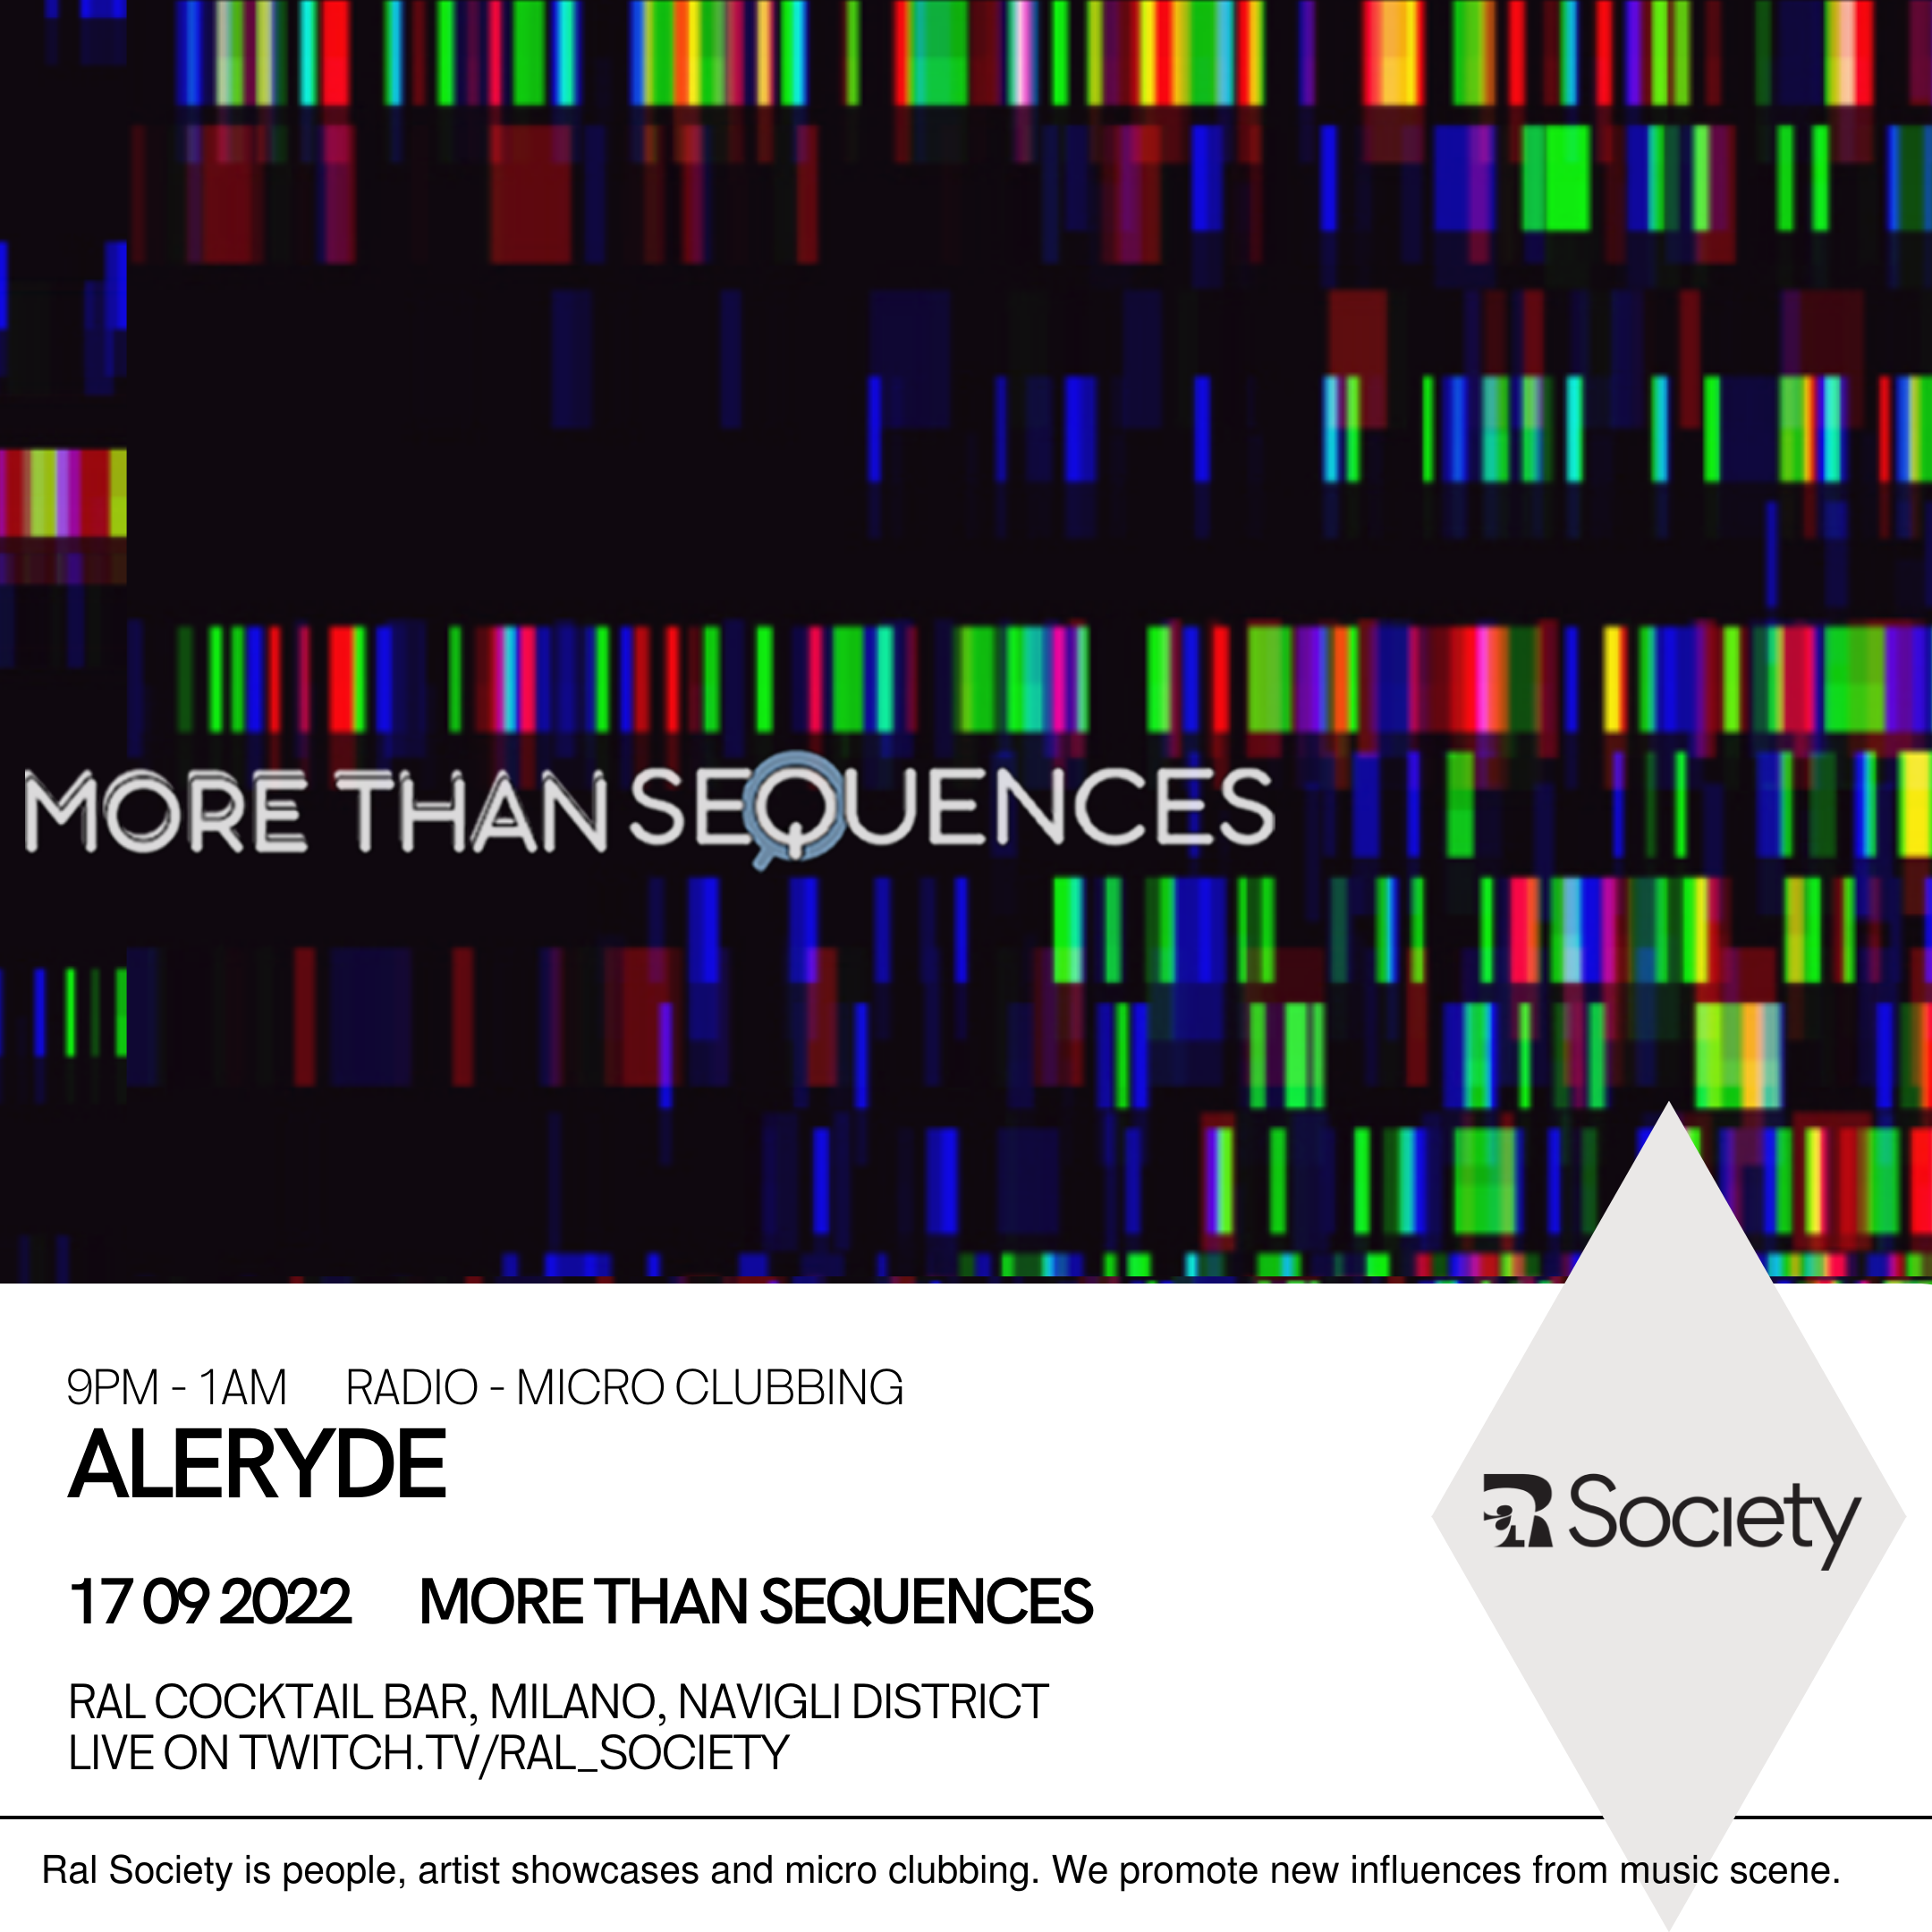 RAL SOCIETY: Radio + Microclubbing with Aleryde - Flyer front